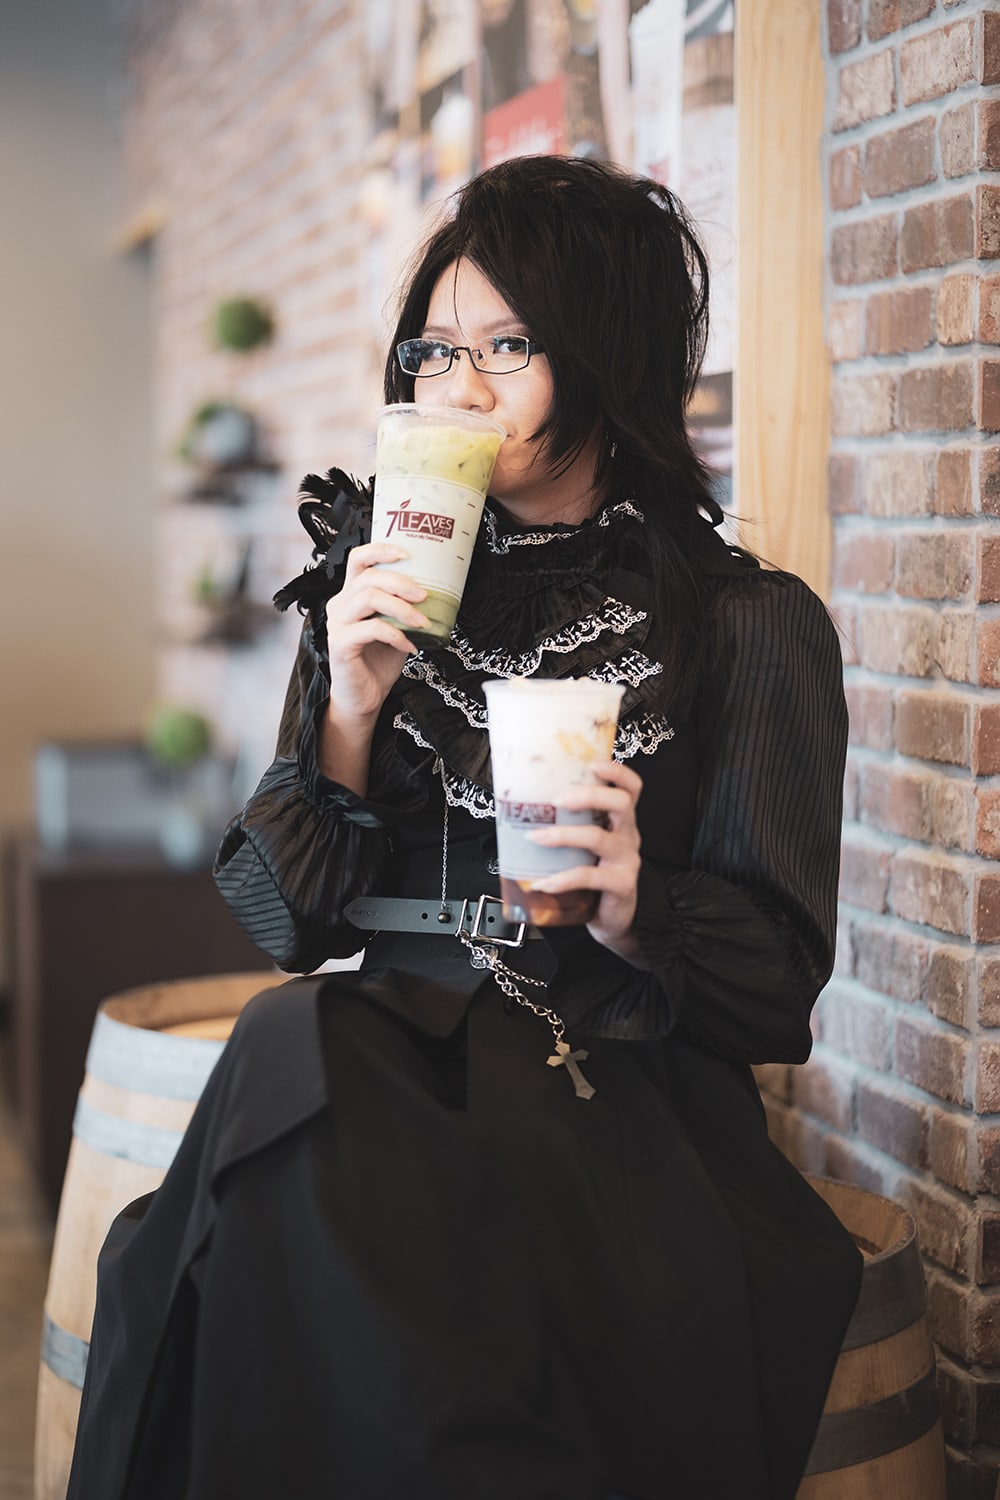 goth holding 2 cups of 7leaves milk tea.